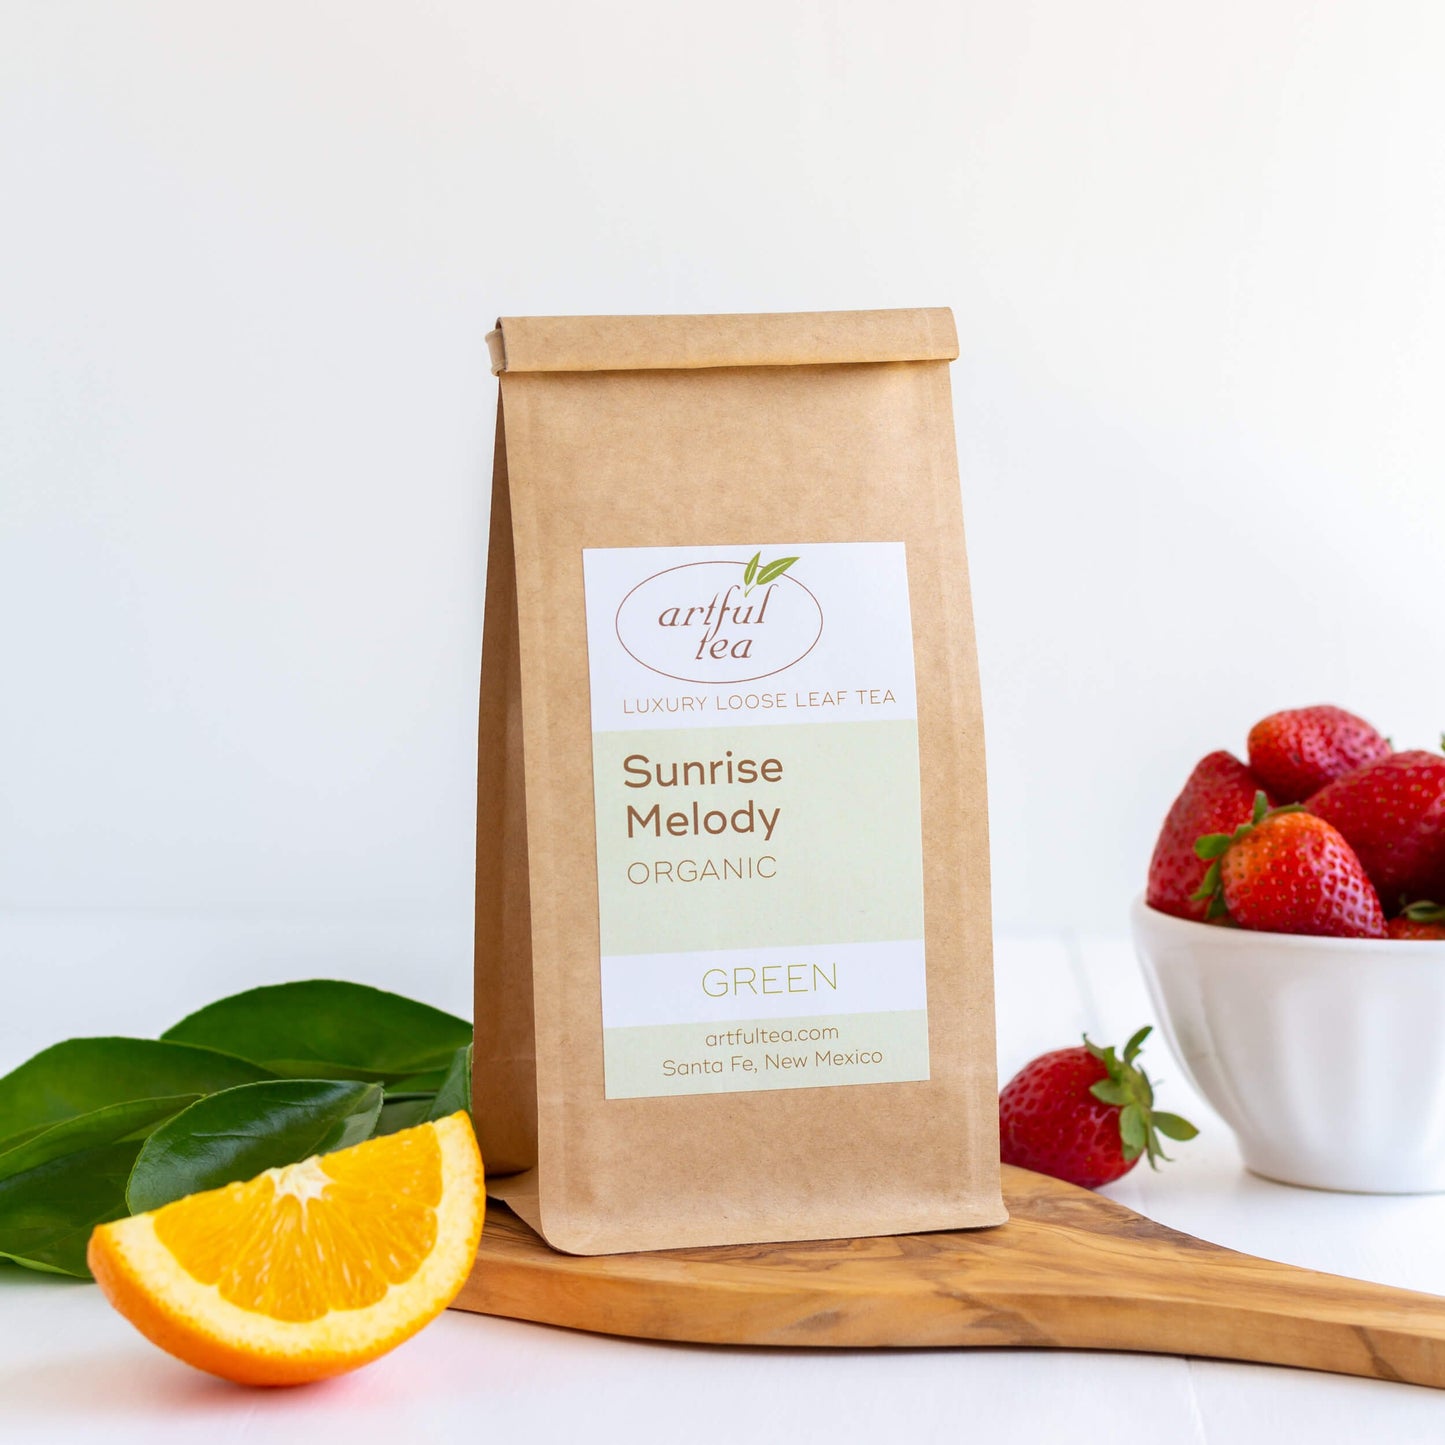 Sunrise Melody Organic Green Tea shown packaged in a kraft bag, displayed on a wooden board with a wedge of orange and a bowl of strawberries.